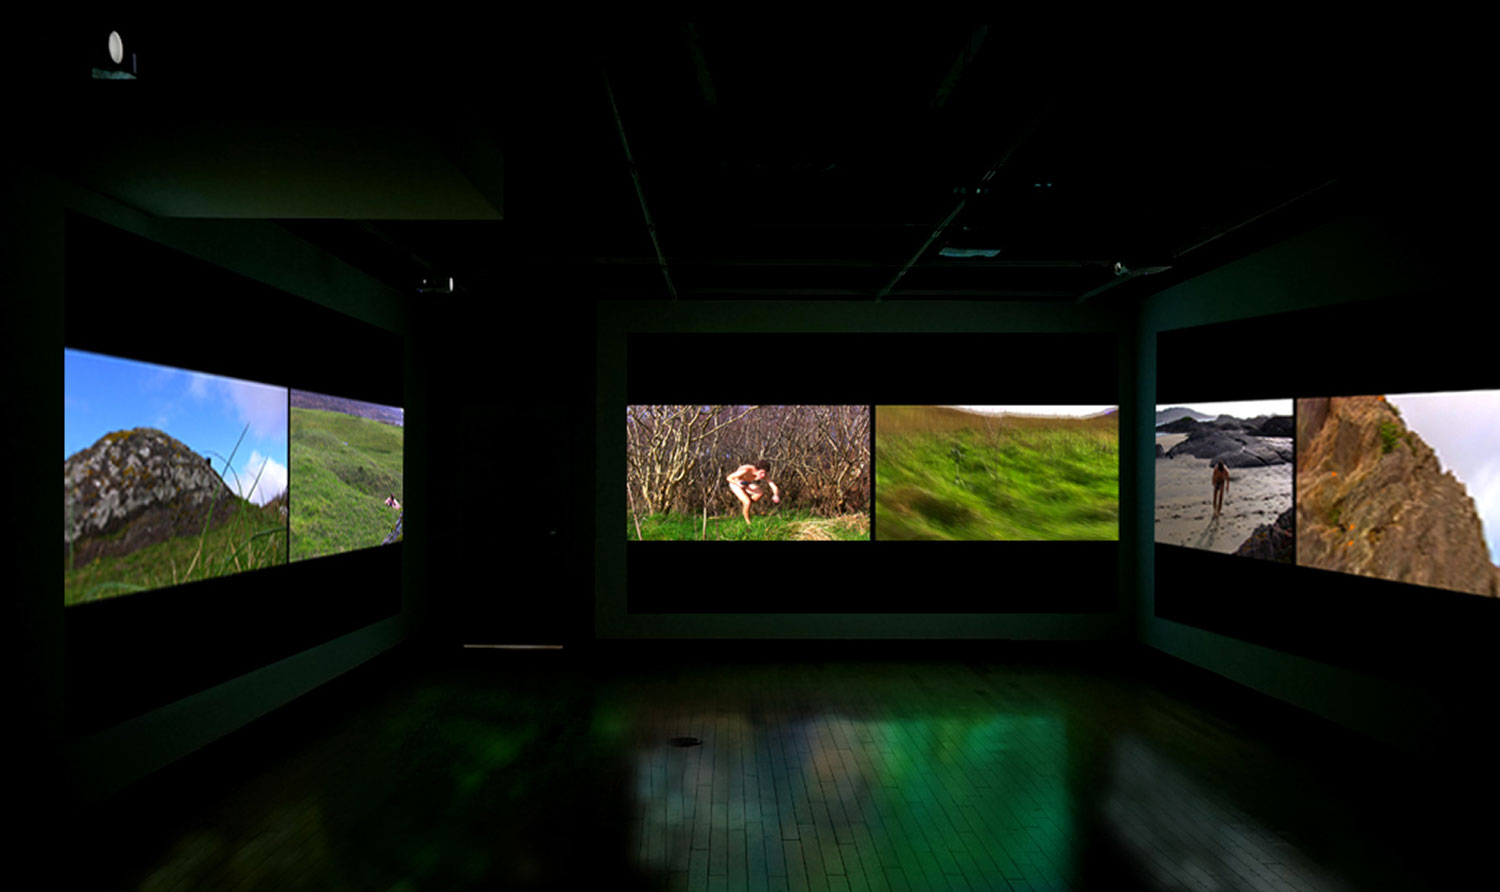 Hunting the Wren, 2012, installation view of three two-channel split screen video<br><br>Go to menu, click VIDEOS, to watch excerpts<br><br>Based upon the antient Irish custom of hunting the wren during the winter solstice, I endeavor to find a wren across the terrain in Ireland.